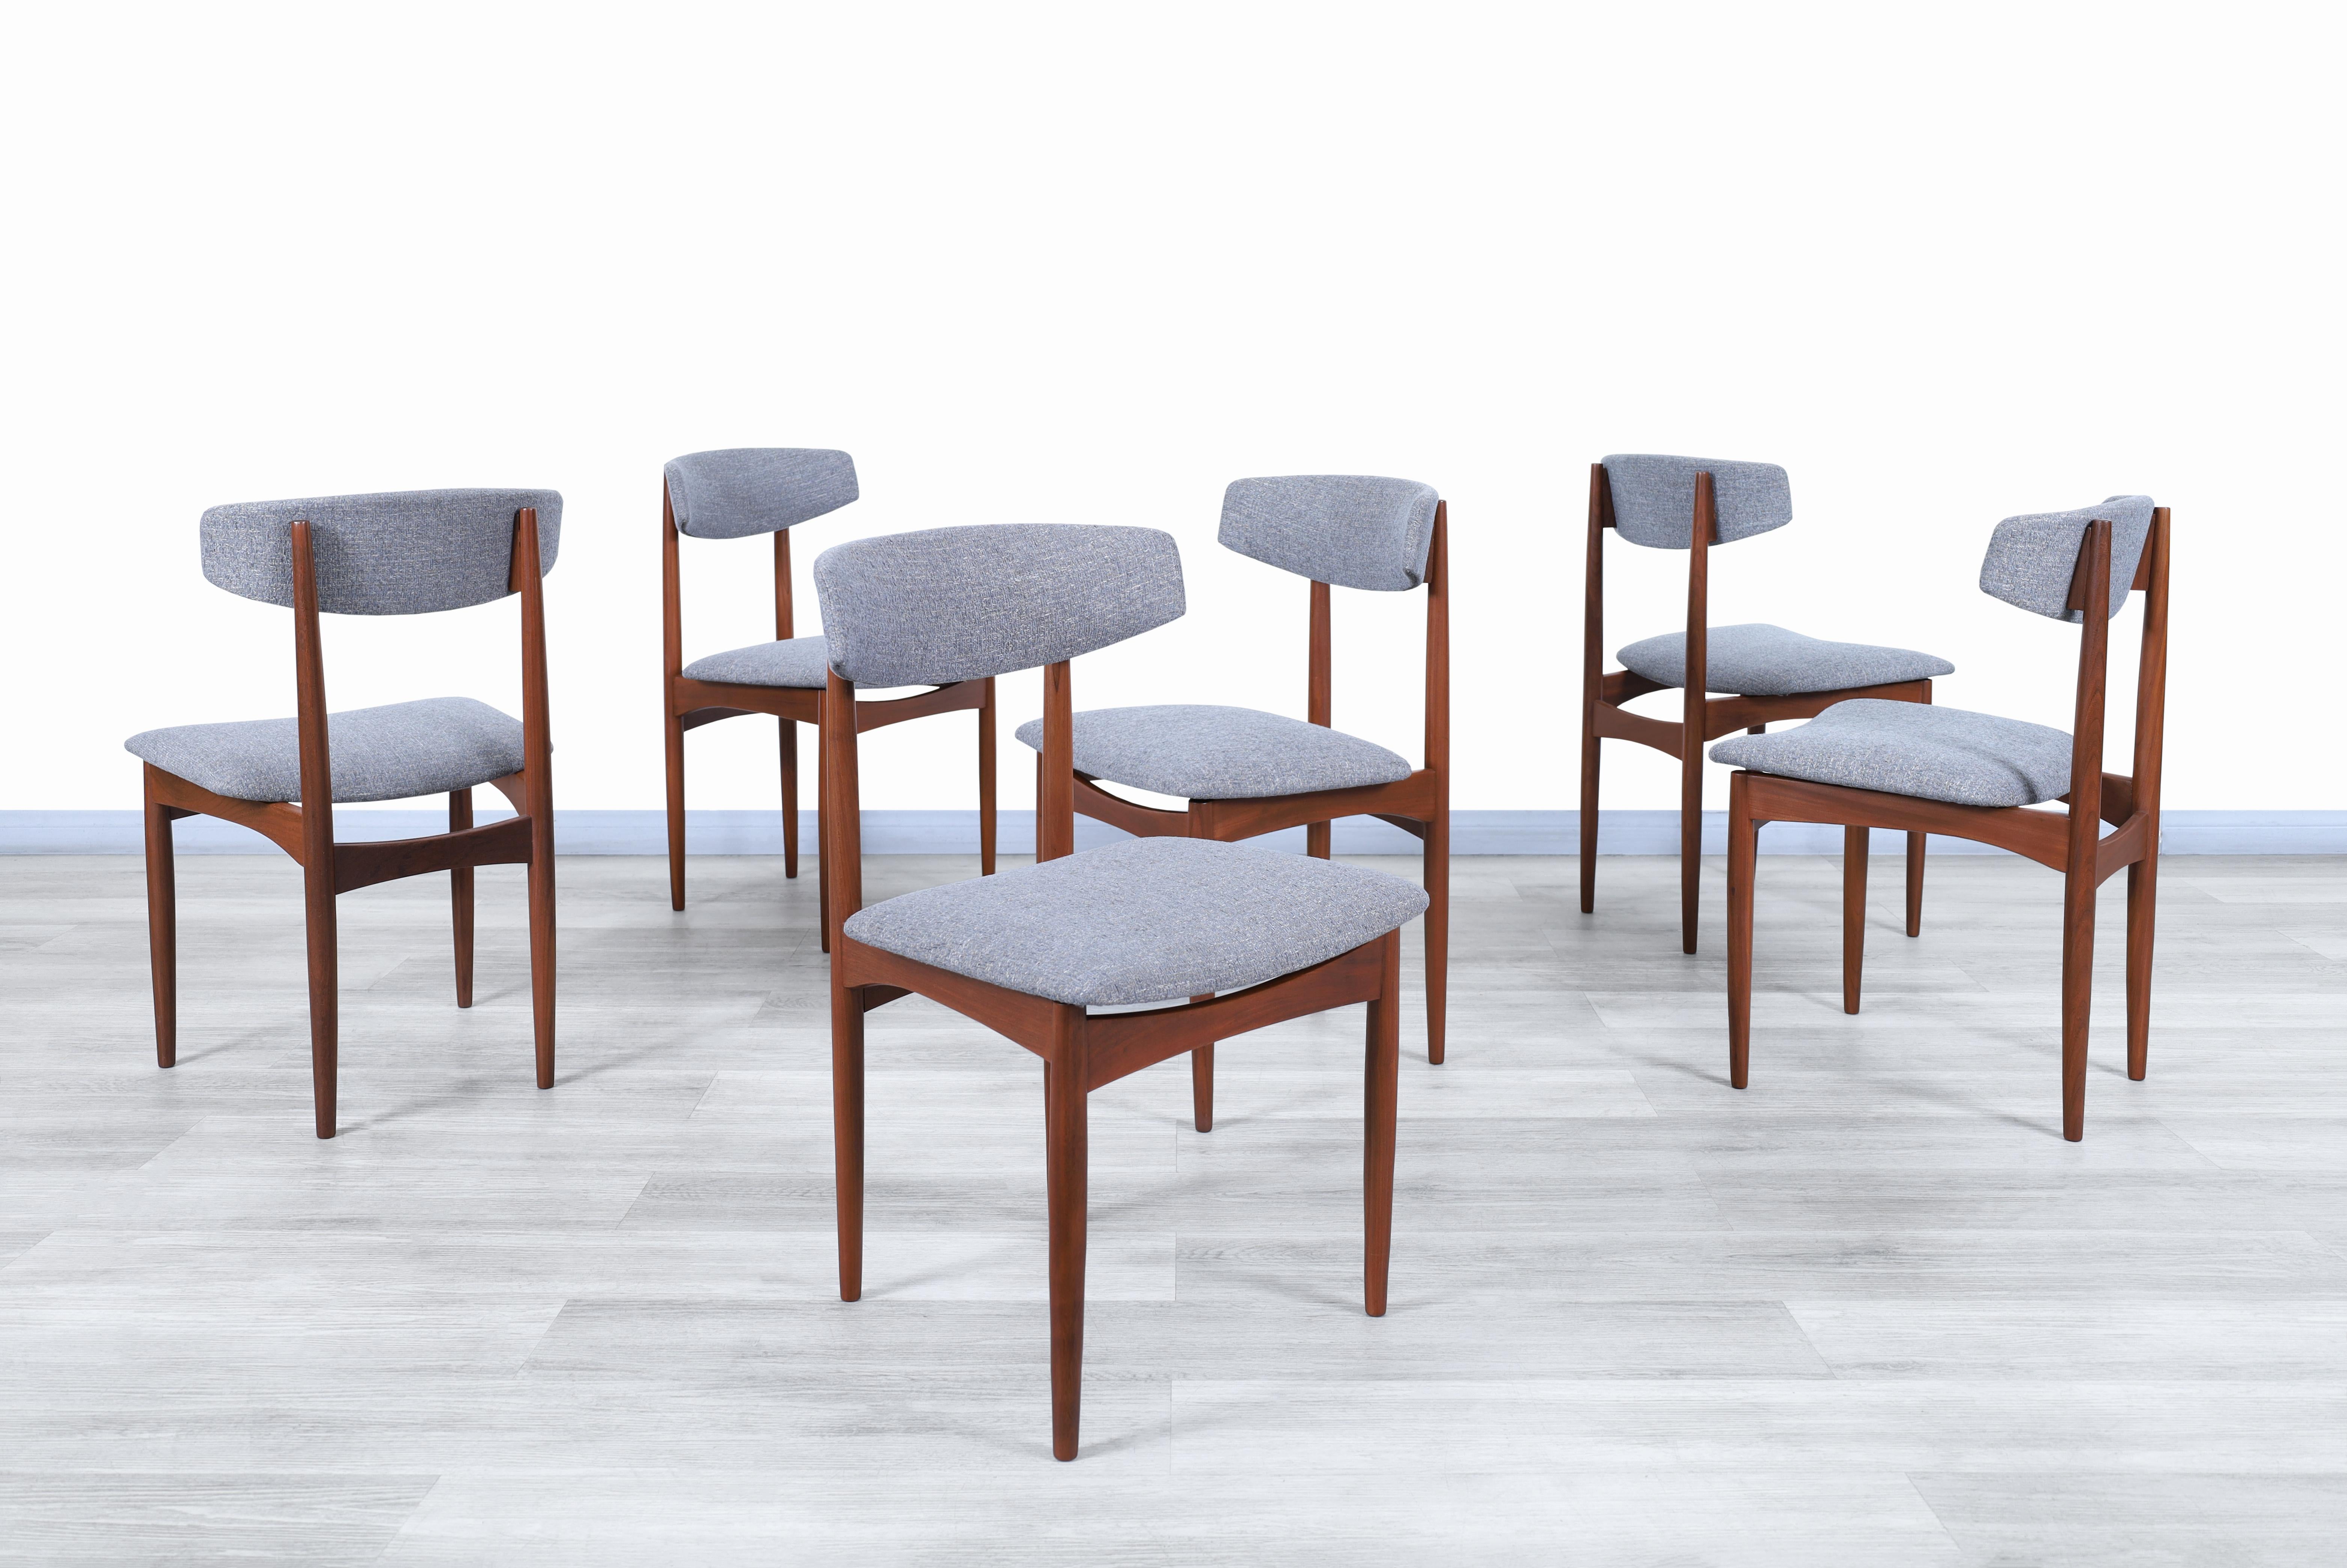 Amazing midcentury teak dining chairs designed and manufactured in the Scandinavian peninsula, circa 1960s. Each chair that makes up this set has a design focused on user comfort and stands out for the Fine choice of materials used for its